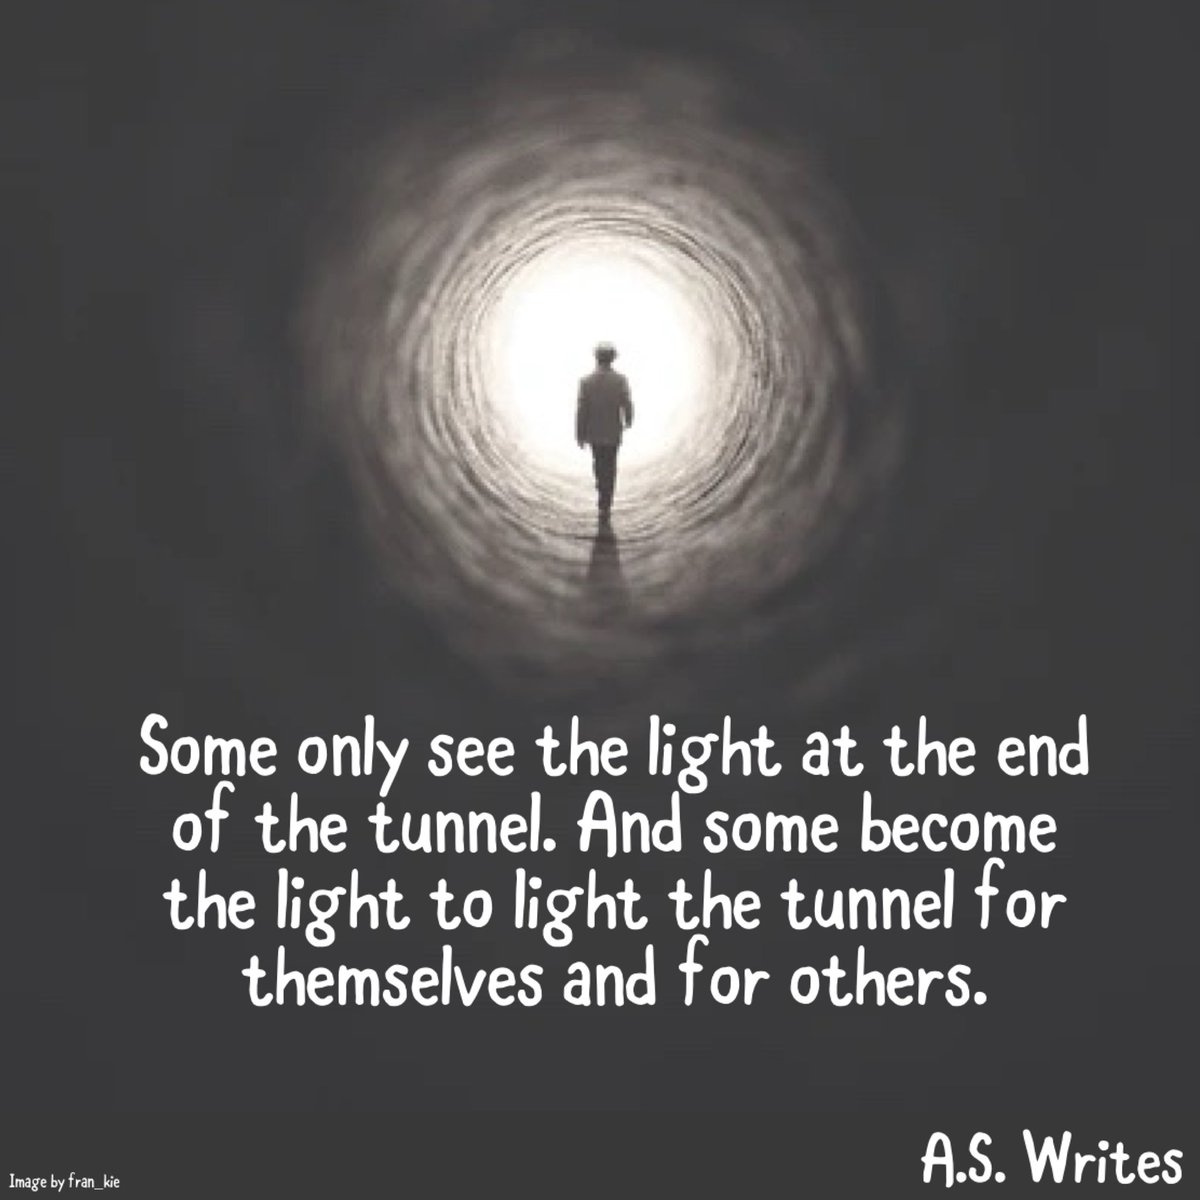 #light #wearelight #quotes #quotesdaily #life #lifequotes #lifelessons #lifequote #lifequotestoliveby #lightanddark #lettherebelight #quotesaboutlife #quotess #quotesandsayings #seethelight #bethelight #bethelightinthedarkness #lightupyourlife